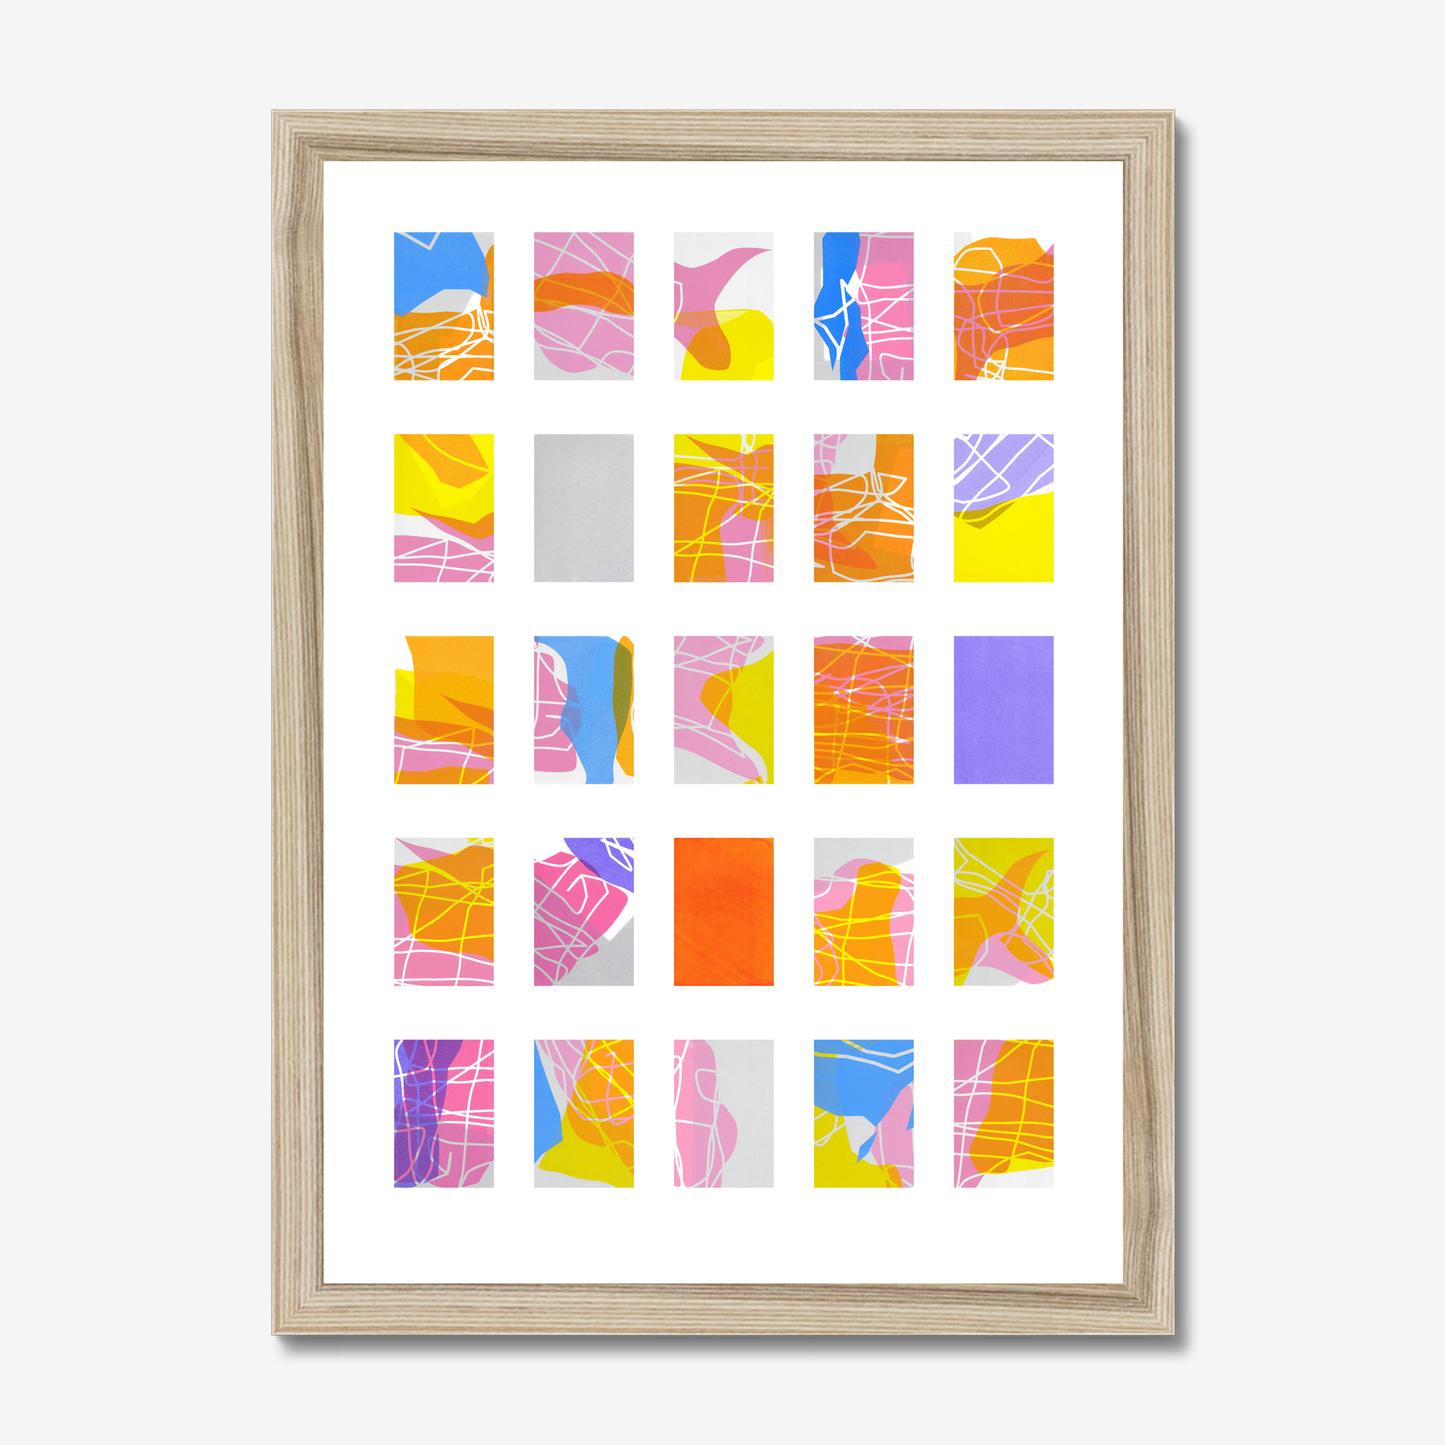 'Collecting Fragments of Space (1)' - Framed Fine Art Print